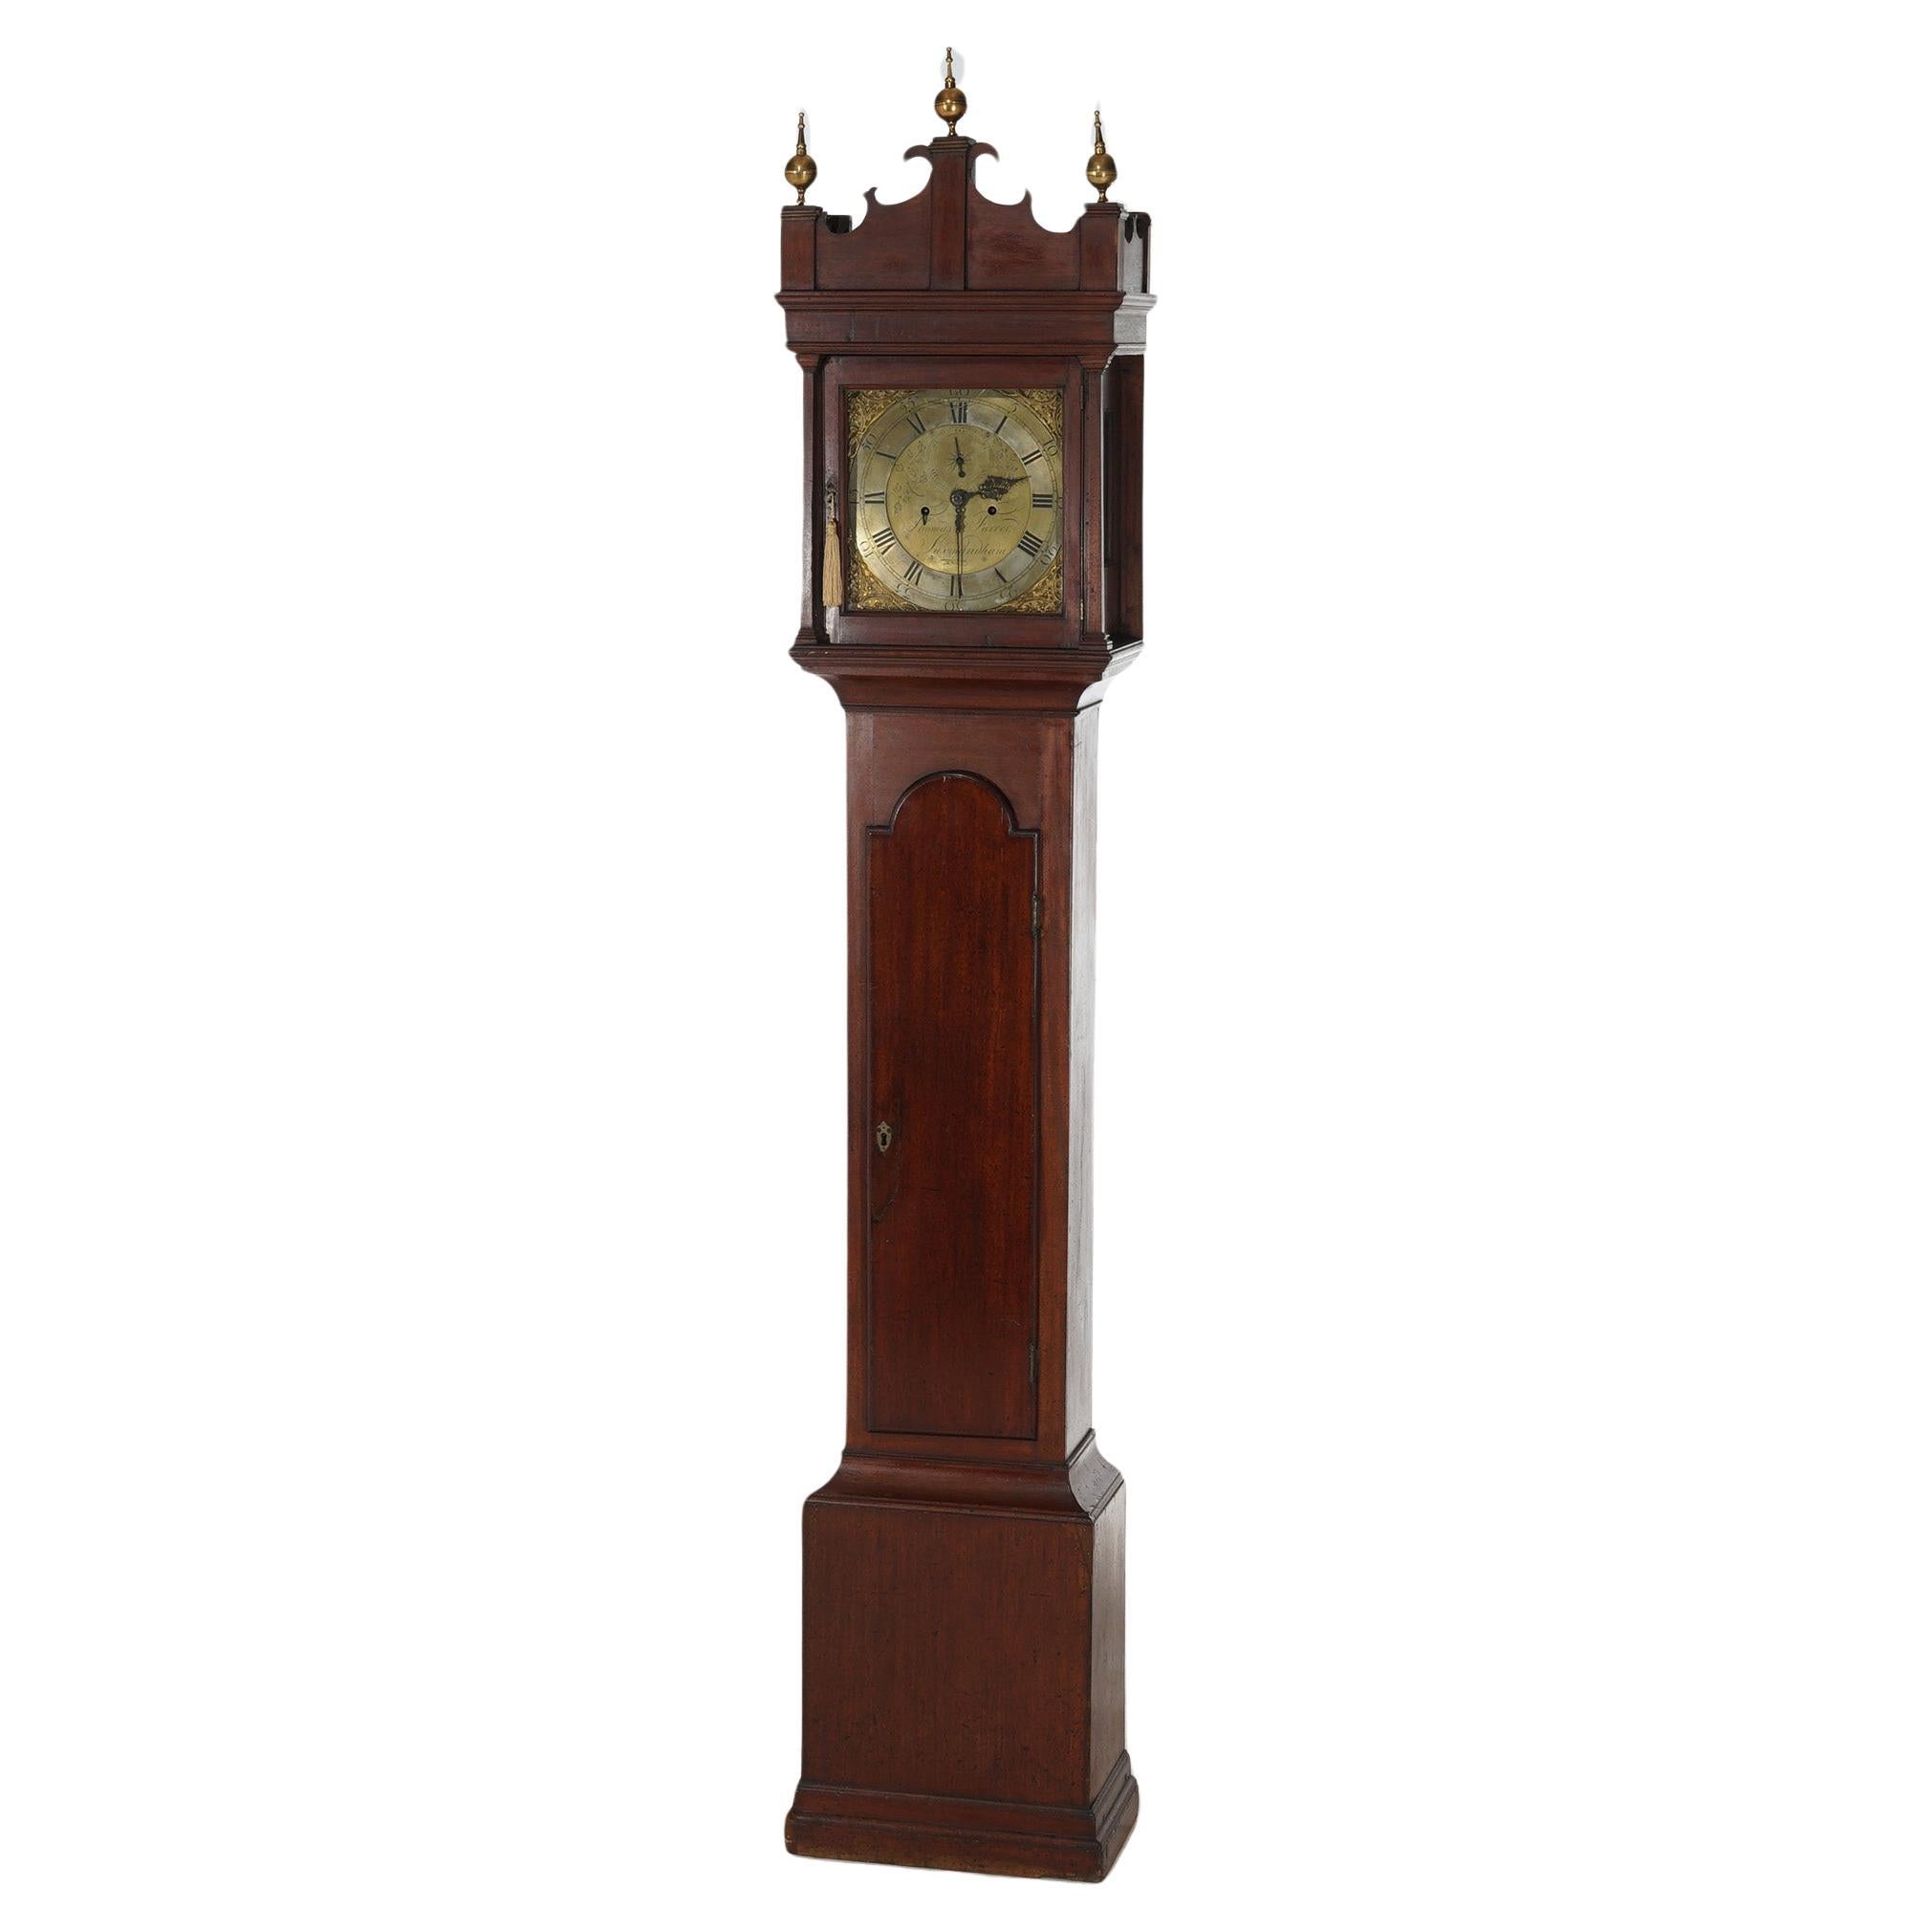 Antique Thomas Farrer Mahogany Grandfather Clock With Brass Finials 19thC For Sale